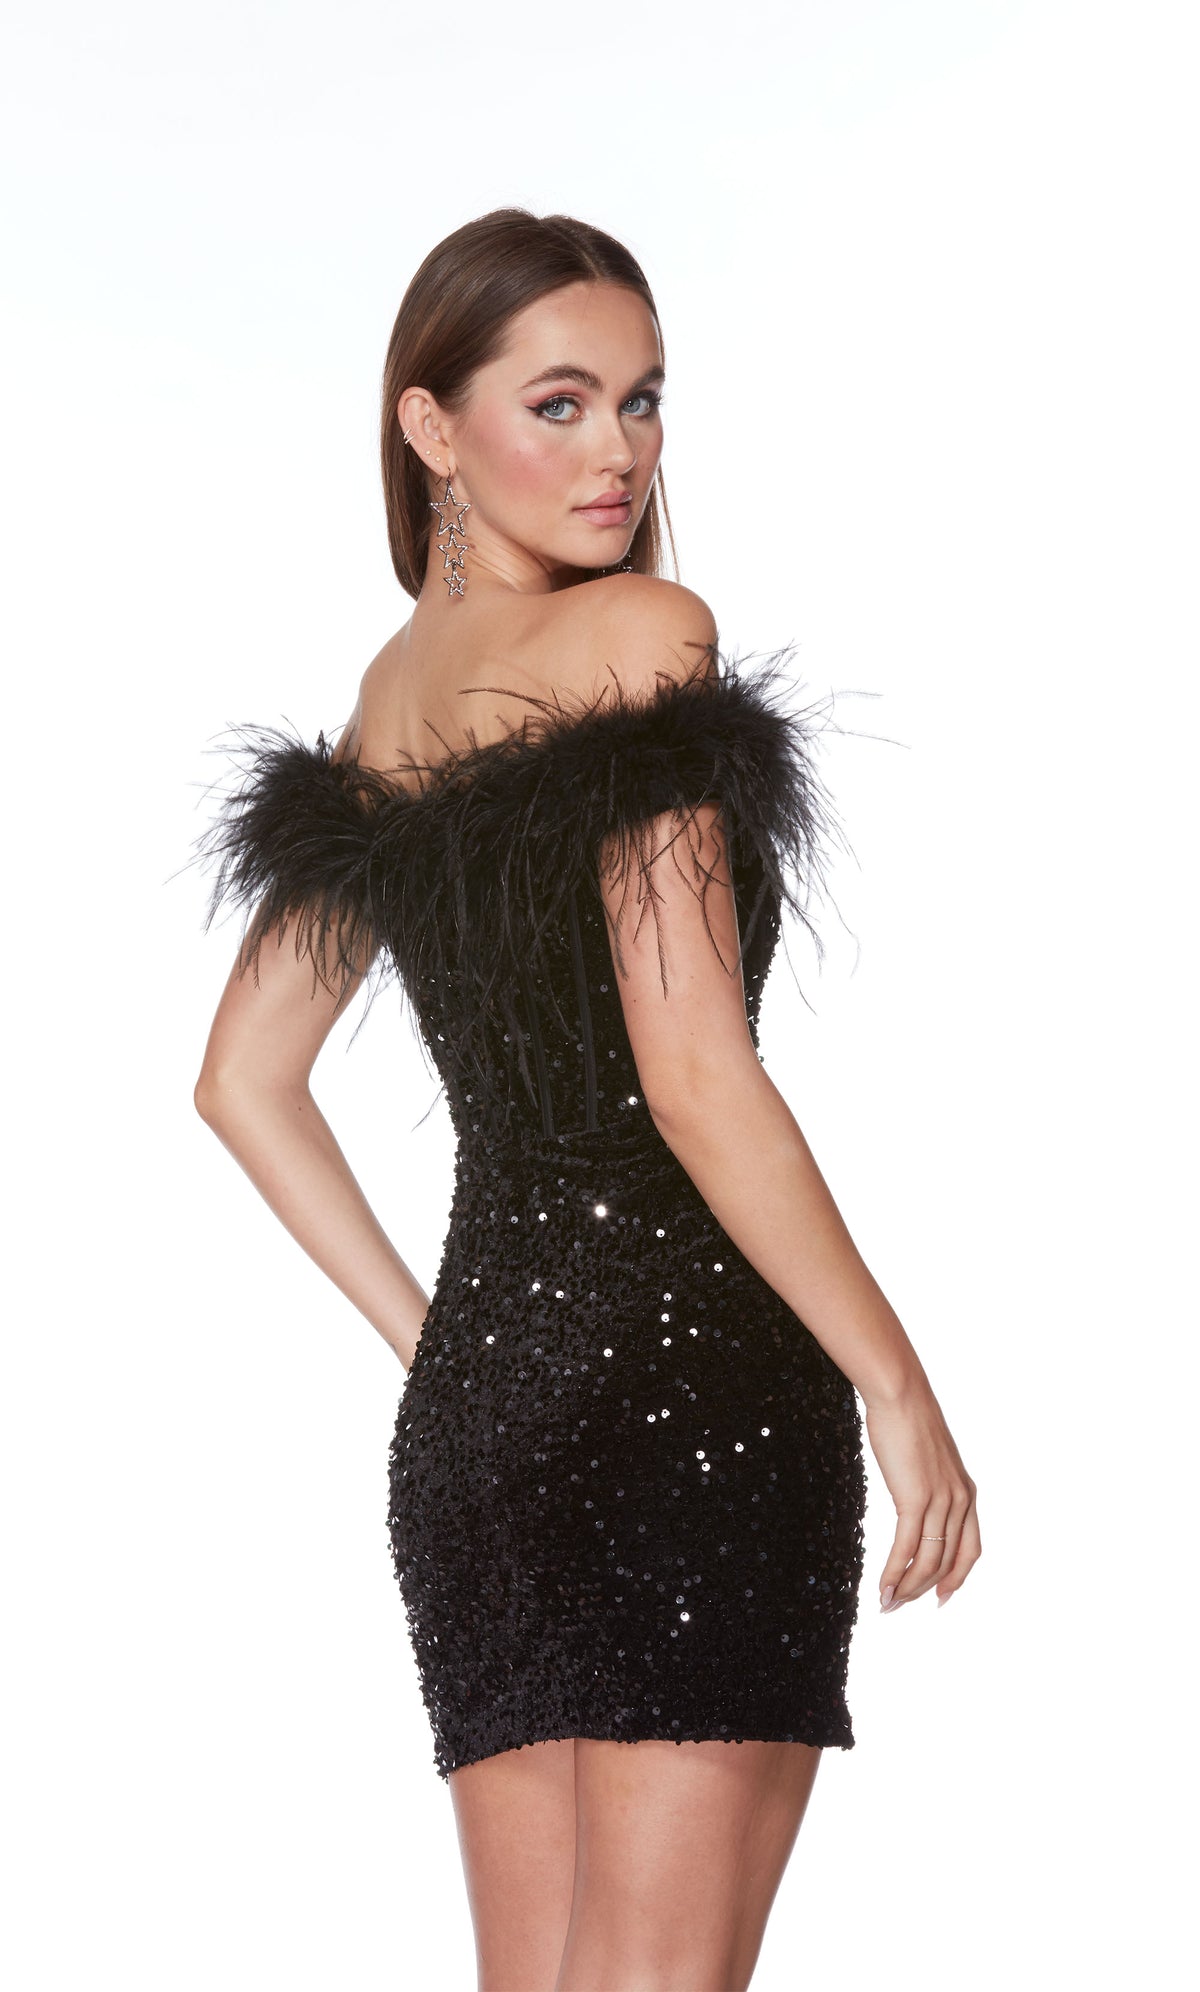 An off-the-shoulder, plunging neckline mini dress with a corset bodice with a zip-up back and feather trim in black plush sequins.